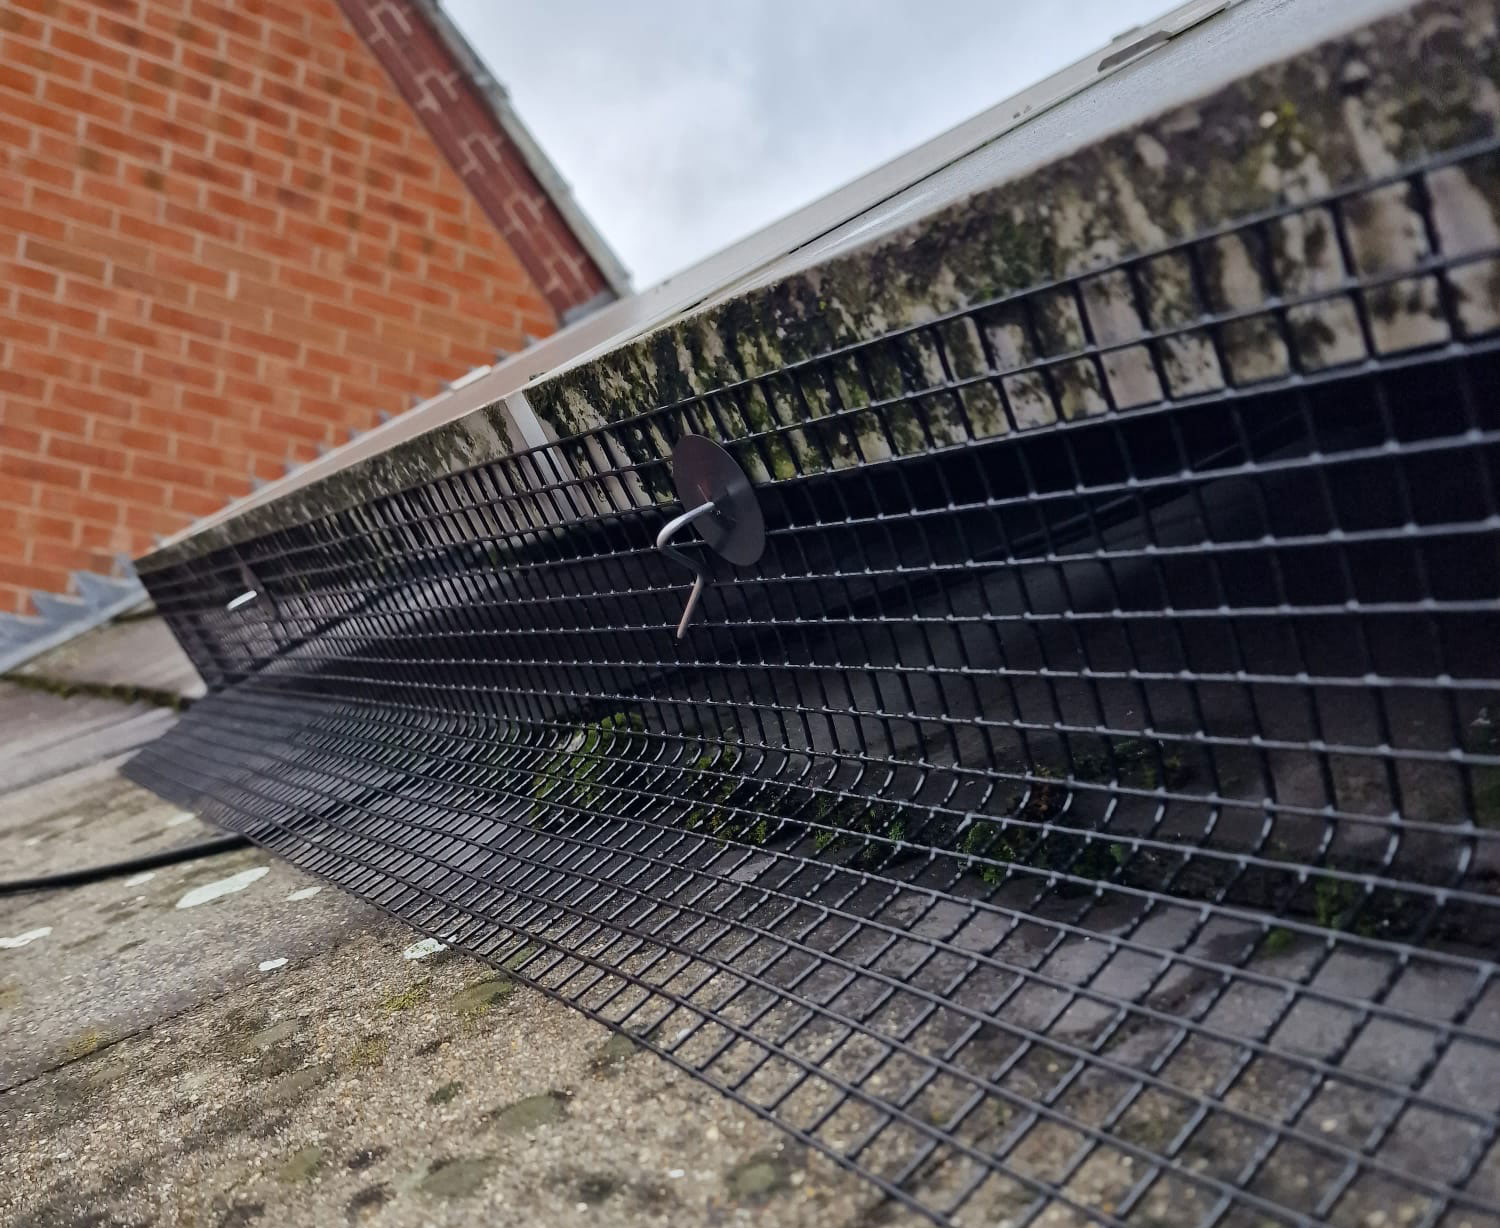 Protecting Solar Panels from Pigeons in Sandiacre